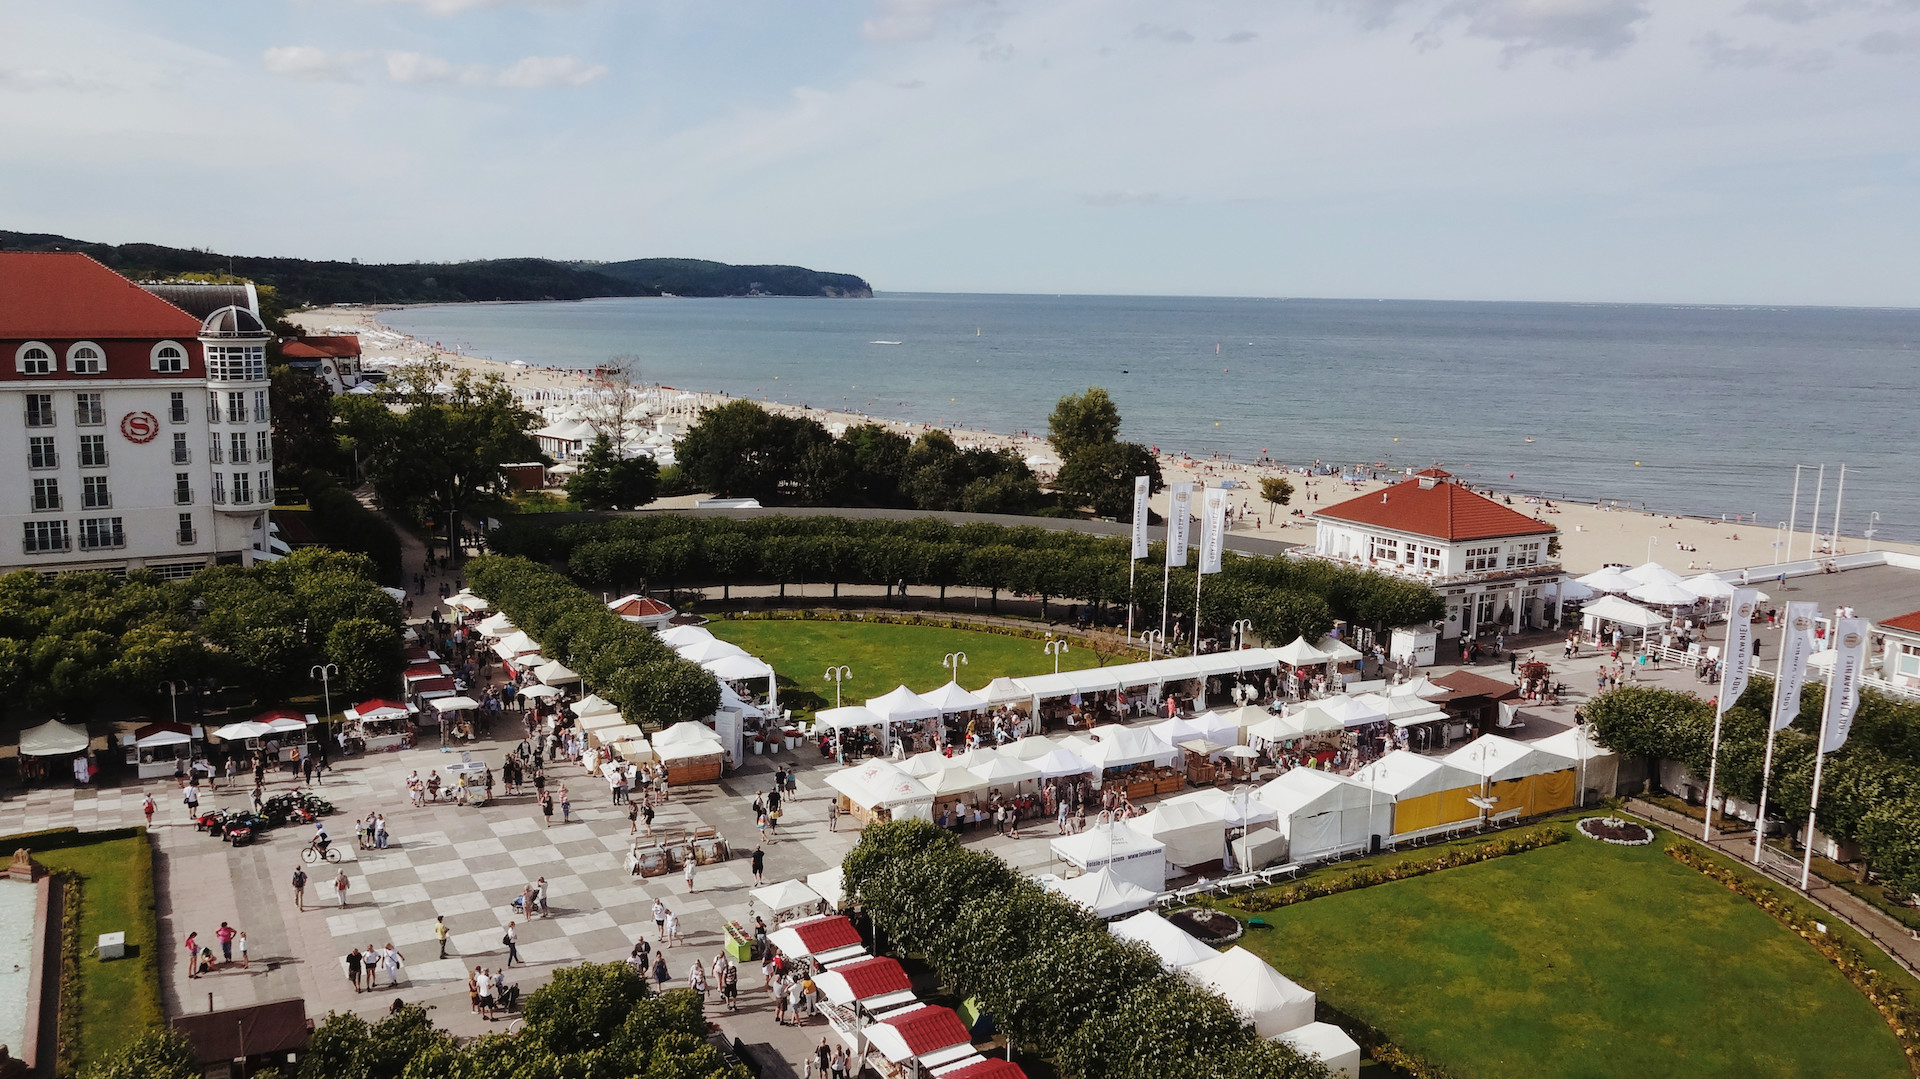 View from the Old Lighthouse in Sopot. Image: Kamila Rymajdo